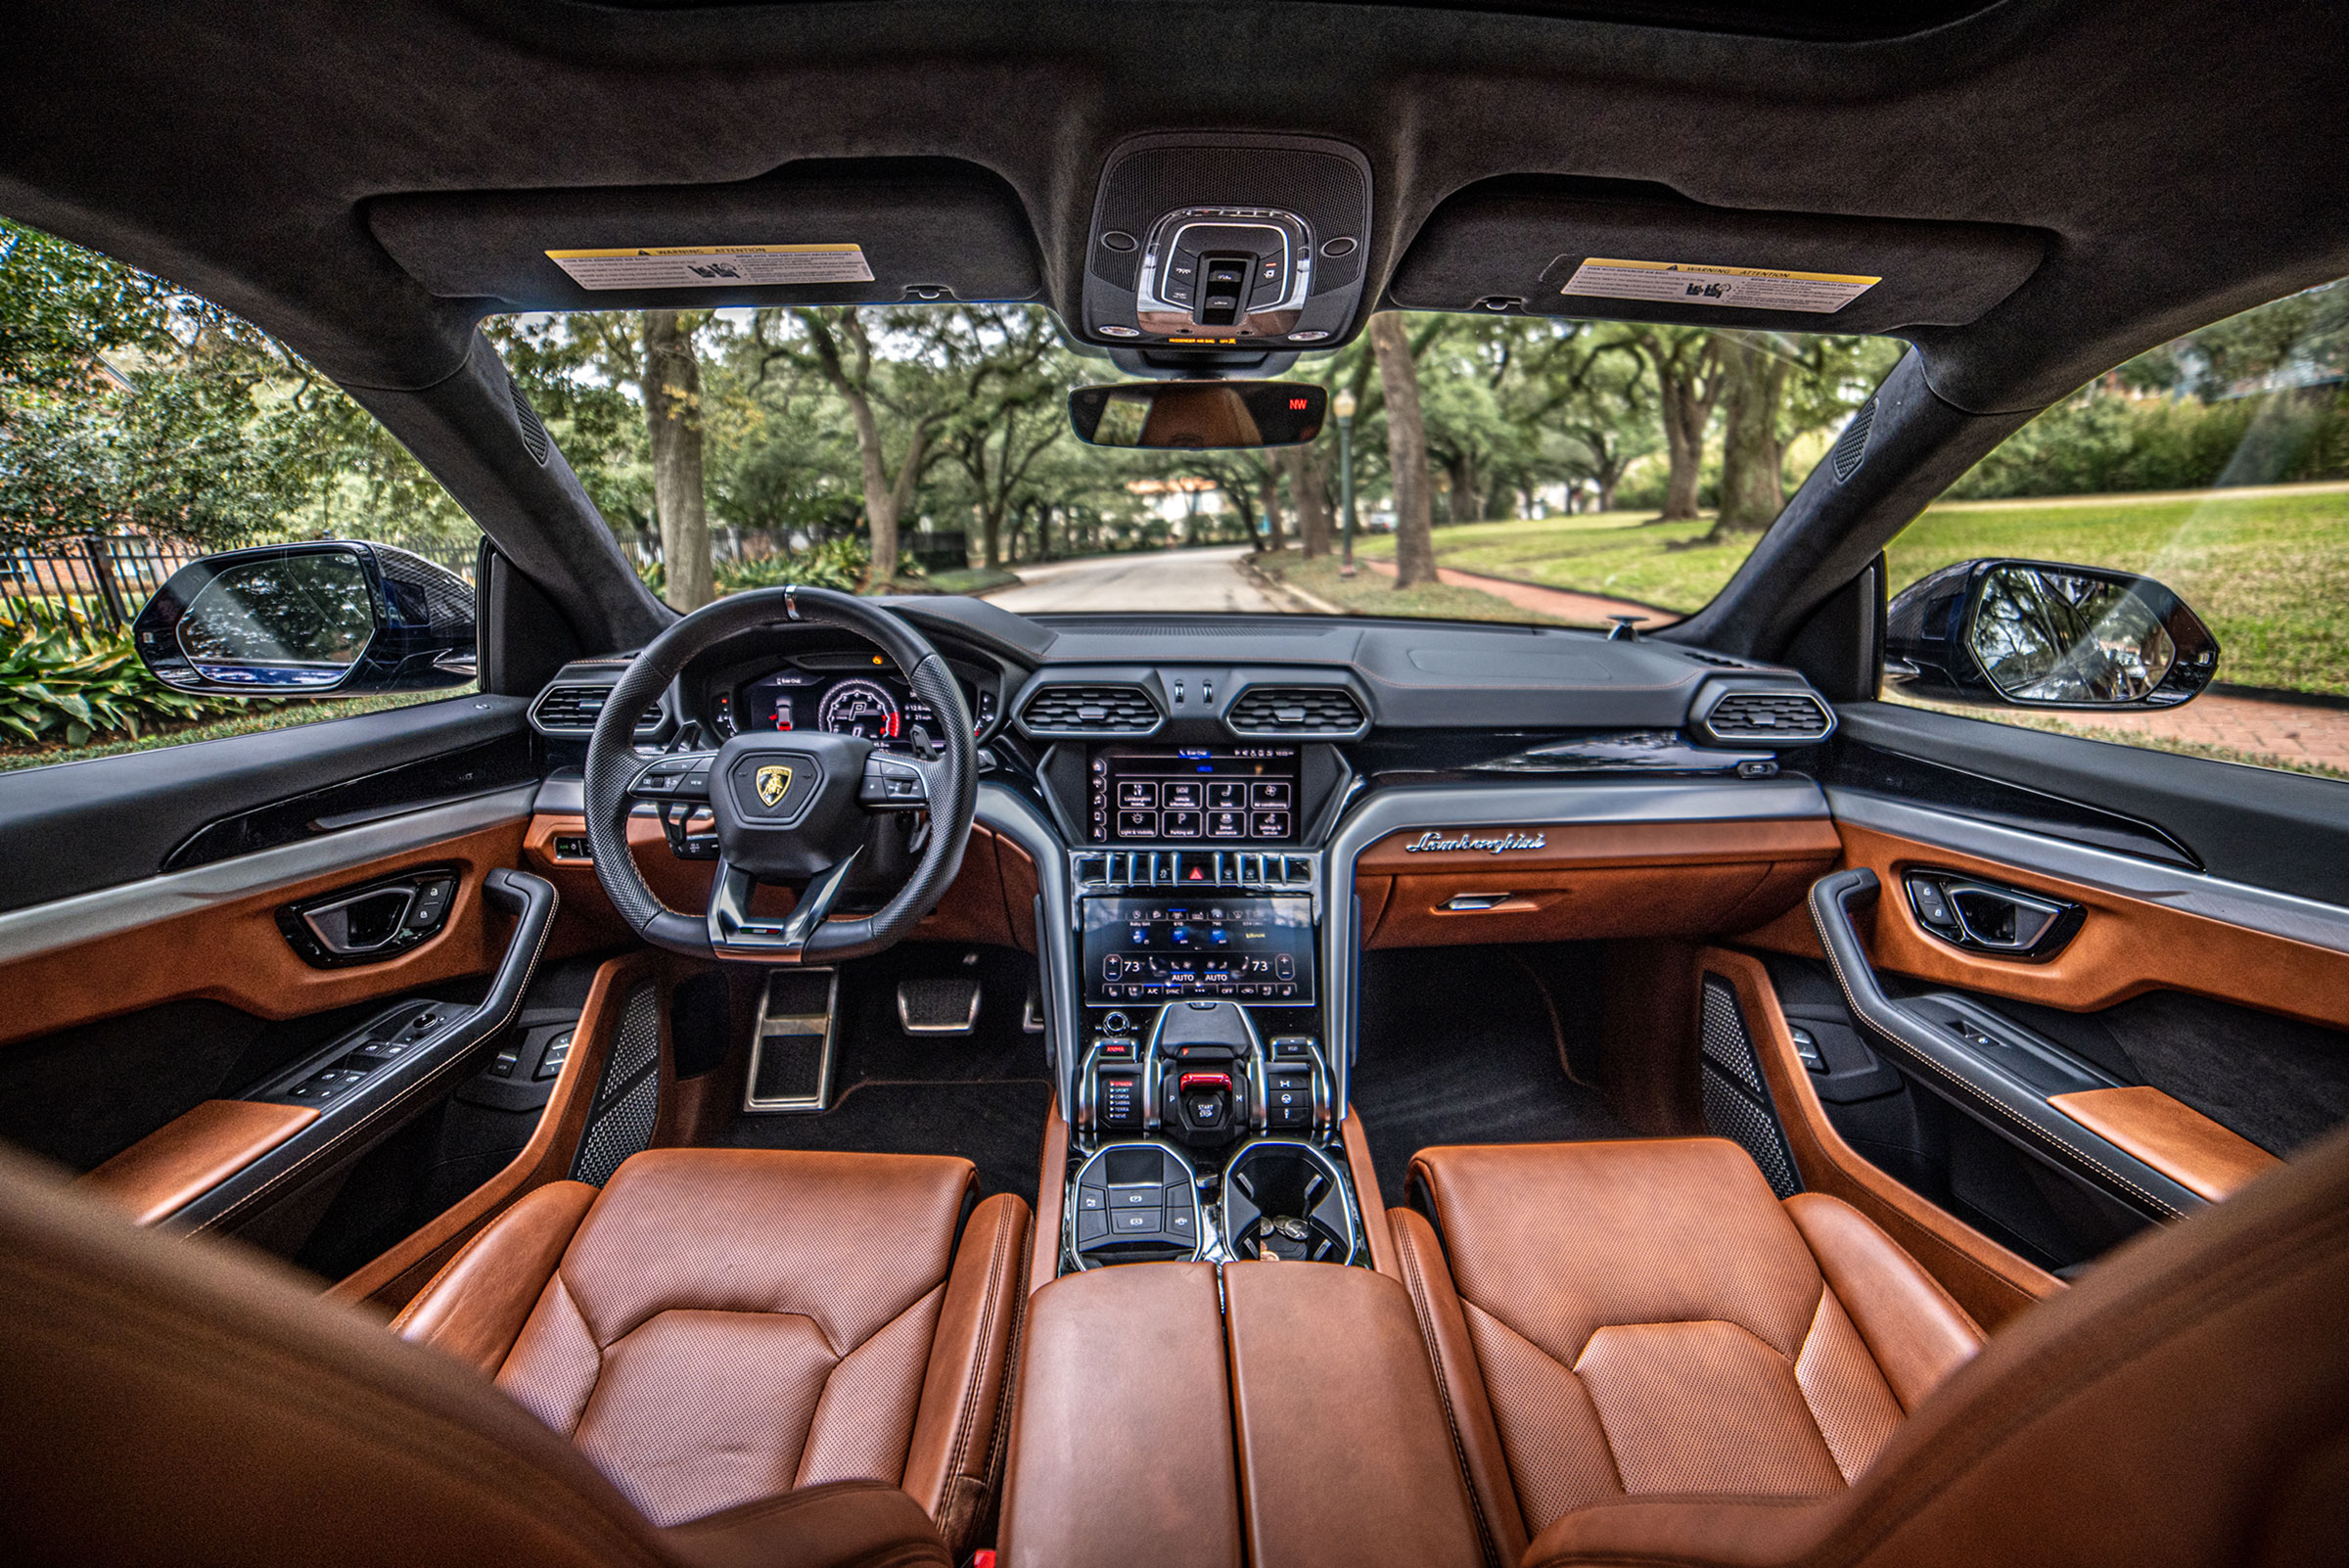 Interior view of a luxury car, a Lamborghini Urus, showcasing a sleek dashboard, high-tech controls, and brown leather seats with a scenic tree-lined street visible through the windshield.